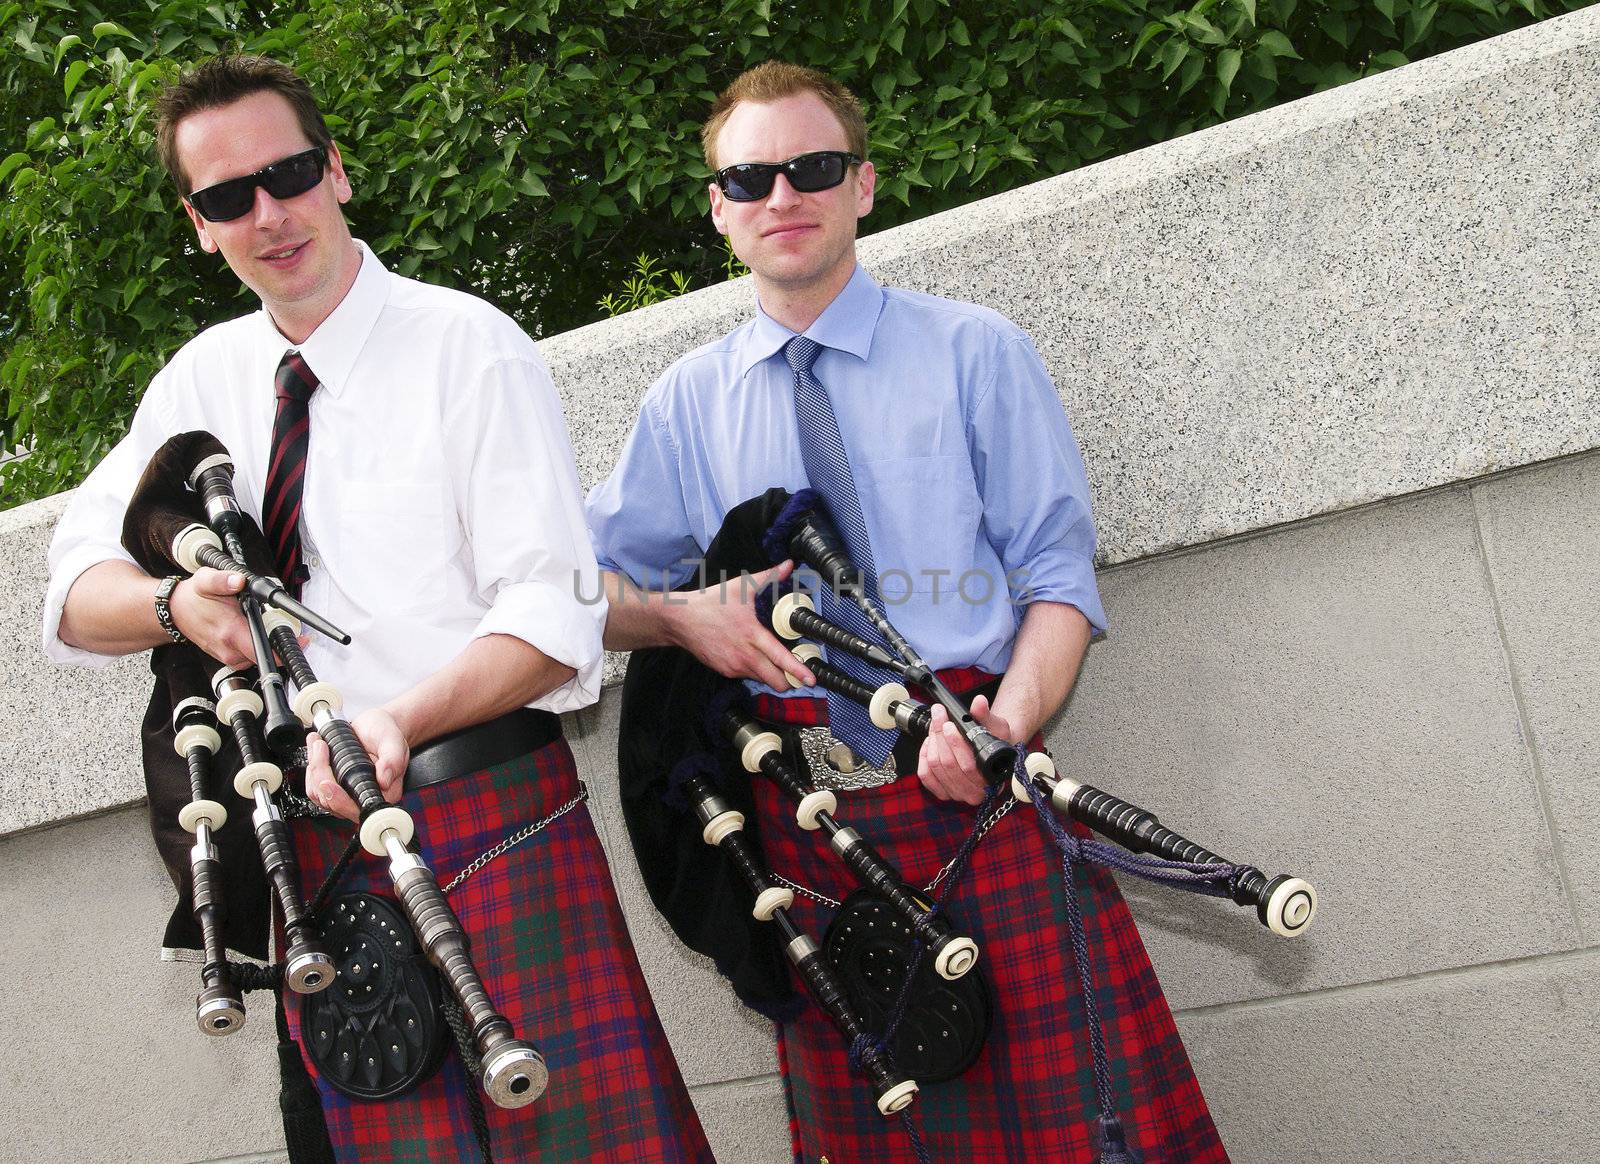 Bagpipe Duo by michelloiselle